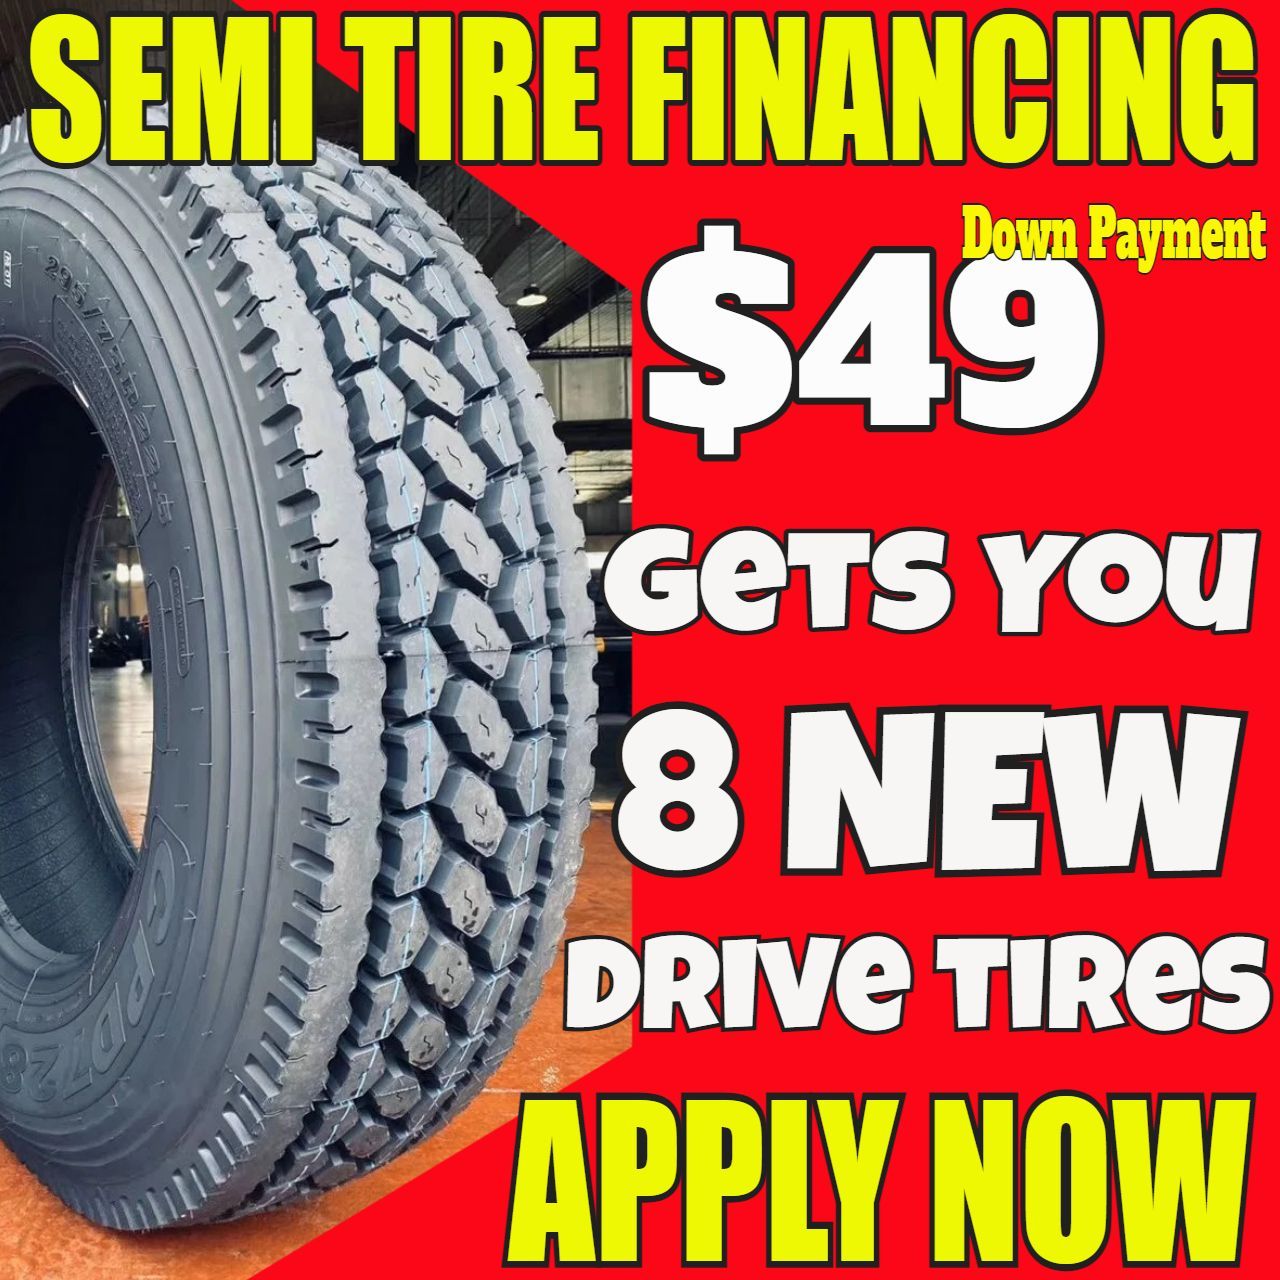 Commercial semi-truck tires in Portland, OR. 18-wheeler Heavy-duty Big-Rig trucking tires at Portland, OR. Cheap tractor-trailer auto vehicle prices in Portland, OR